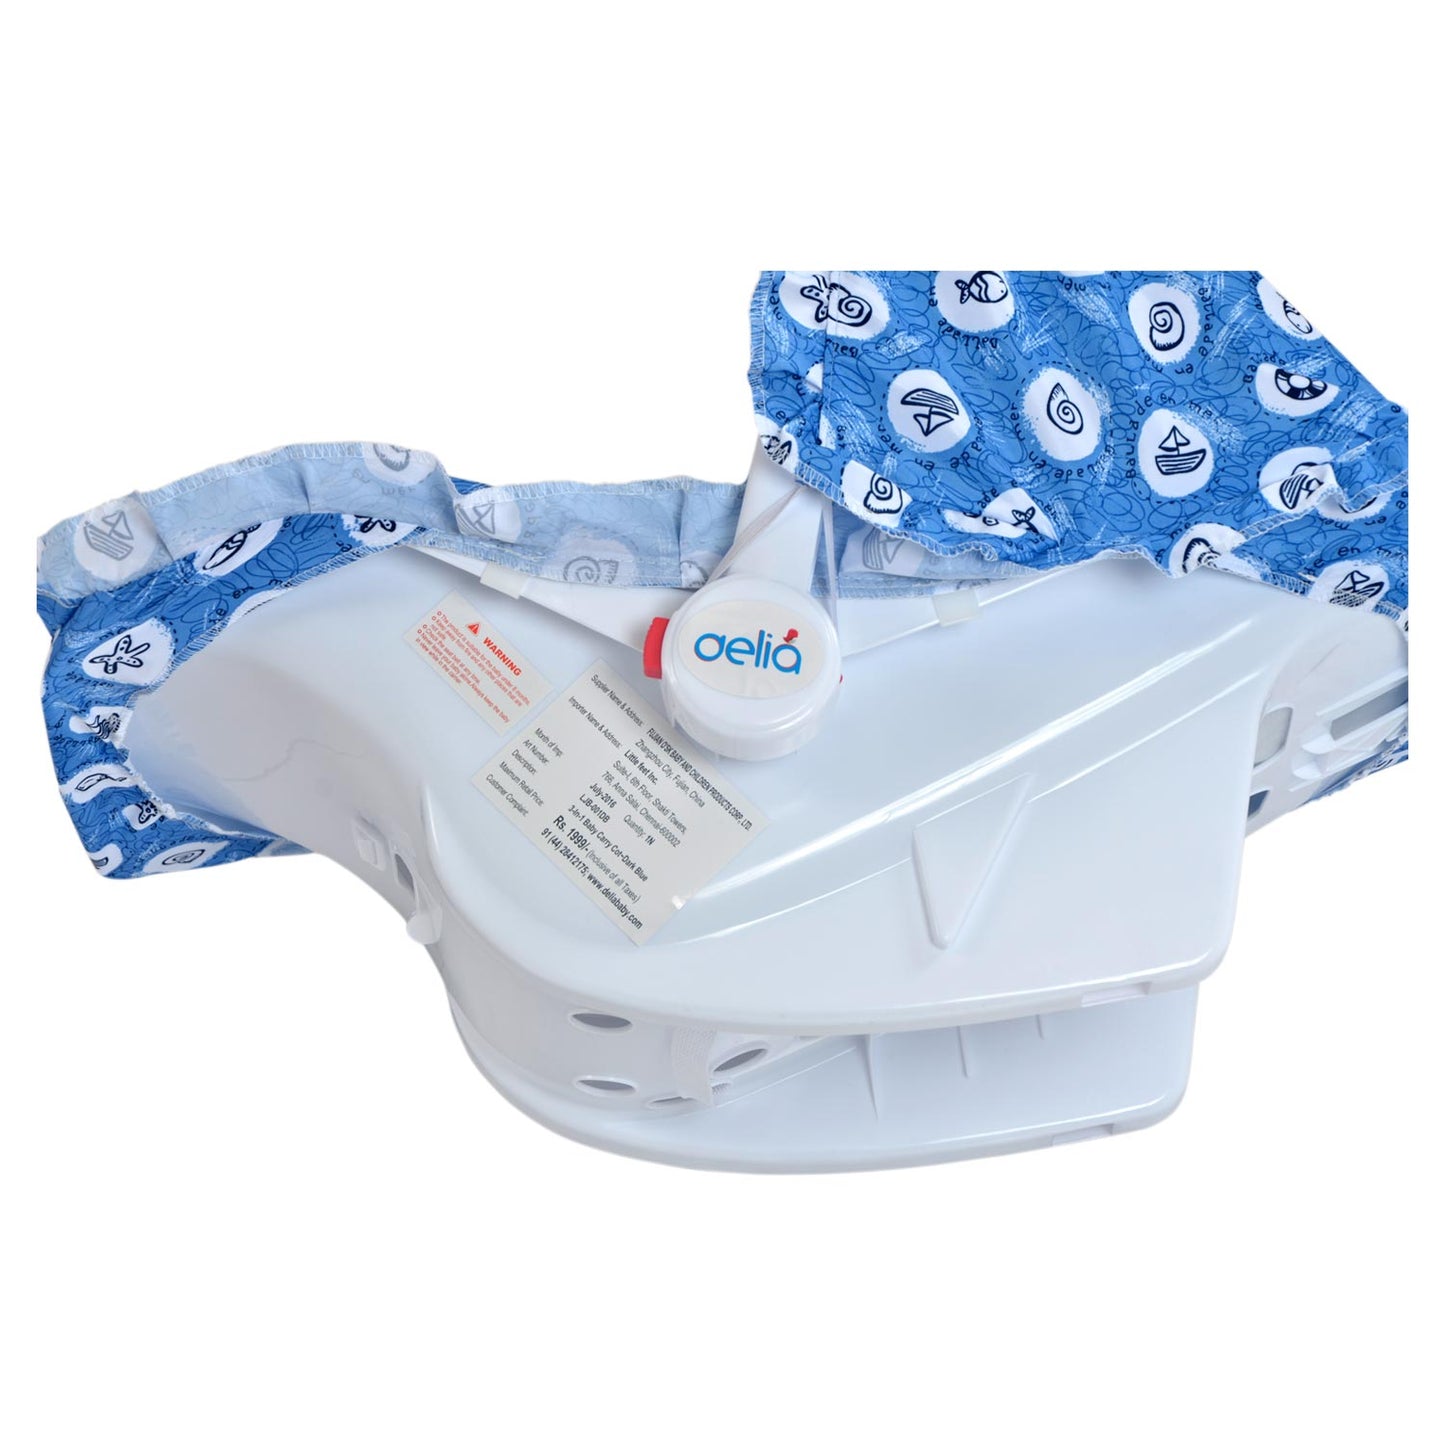 3-In-1 Baby Carry Cot~Cream(Without Packing)